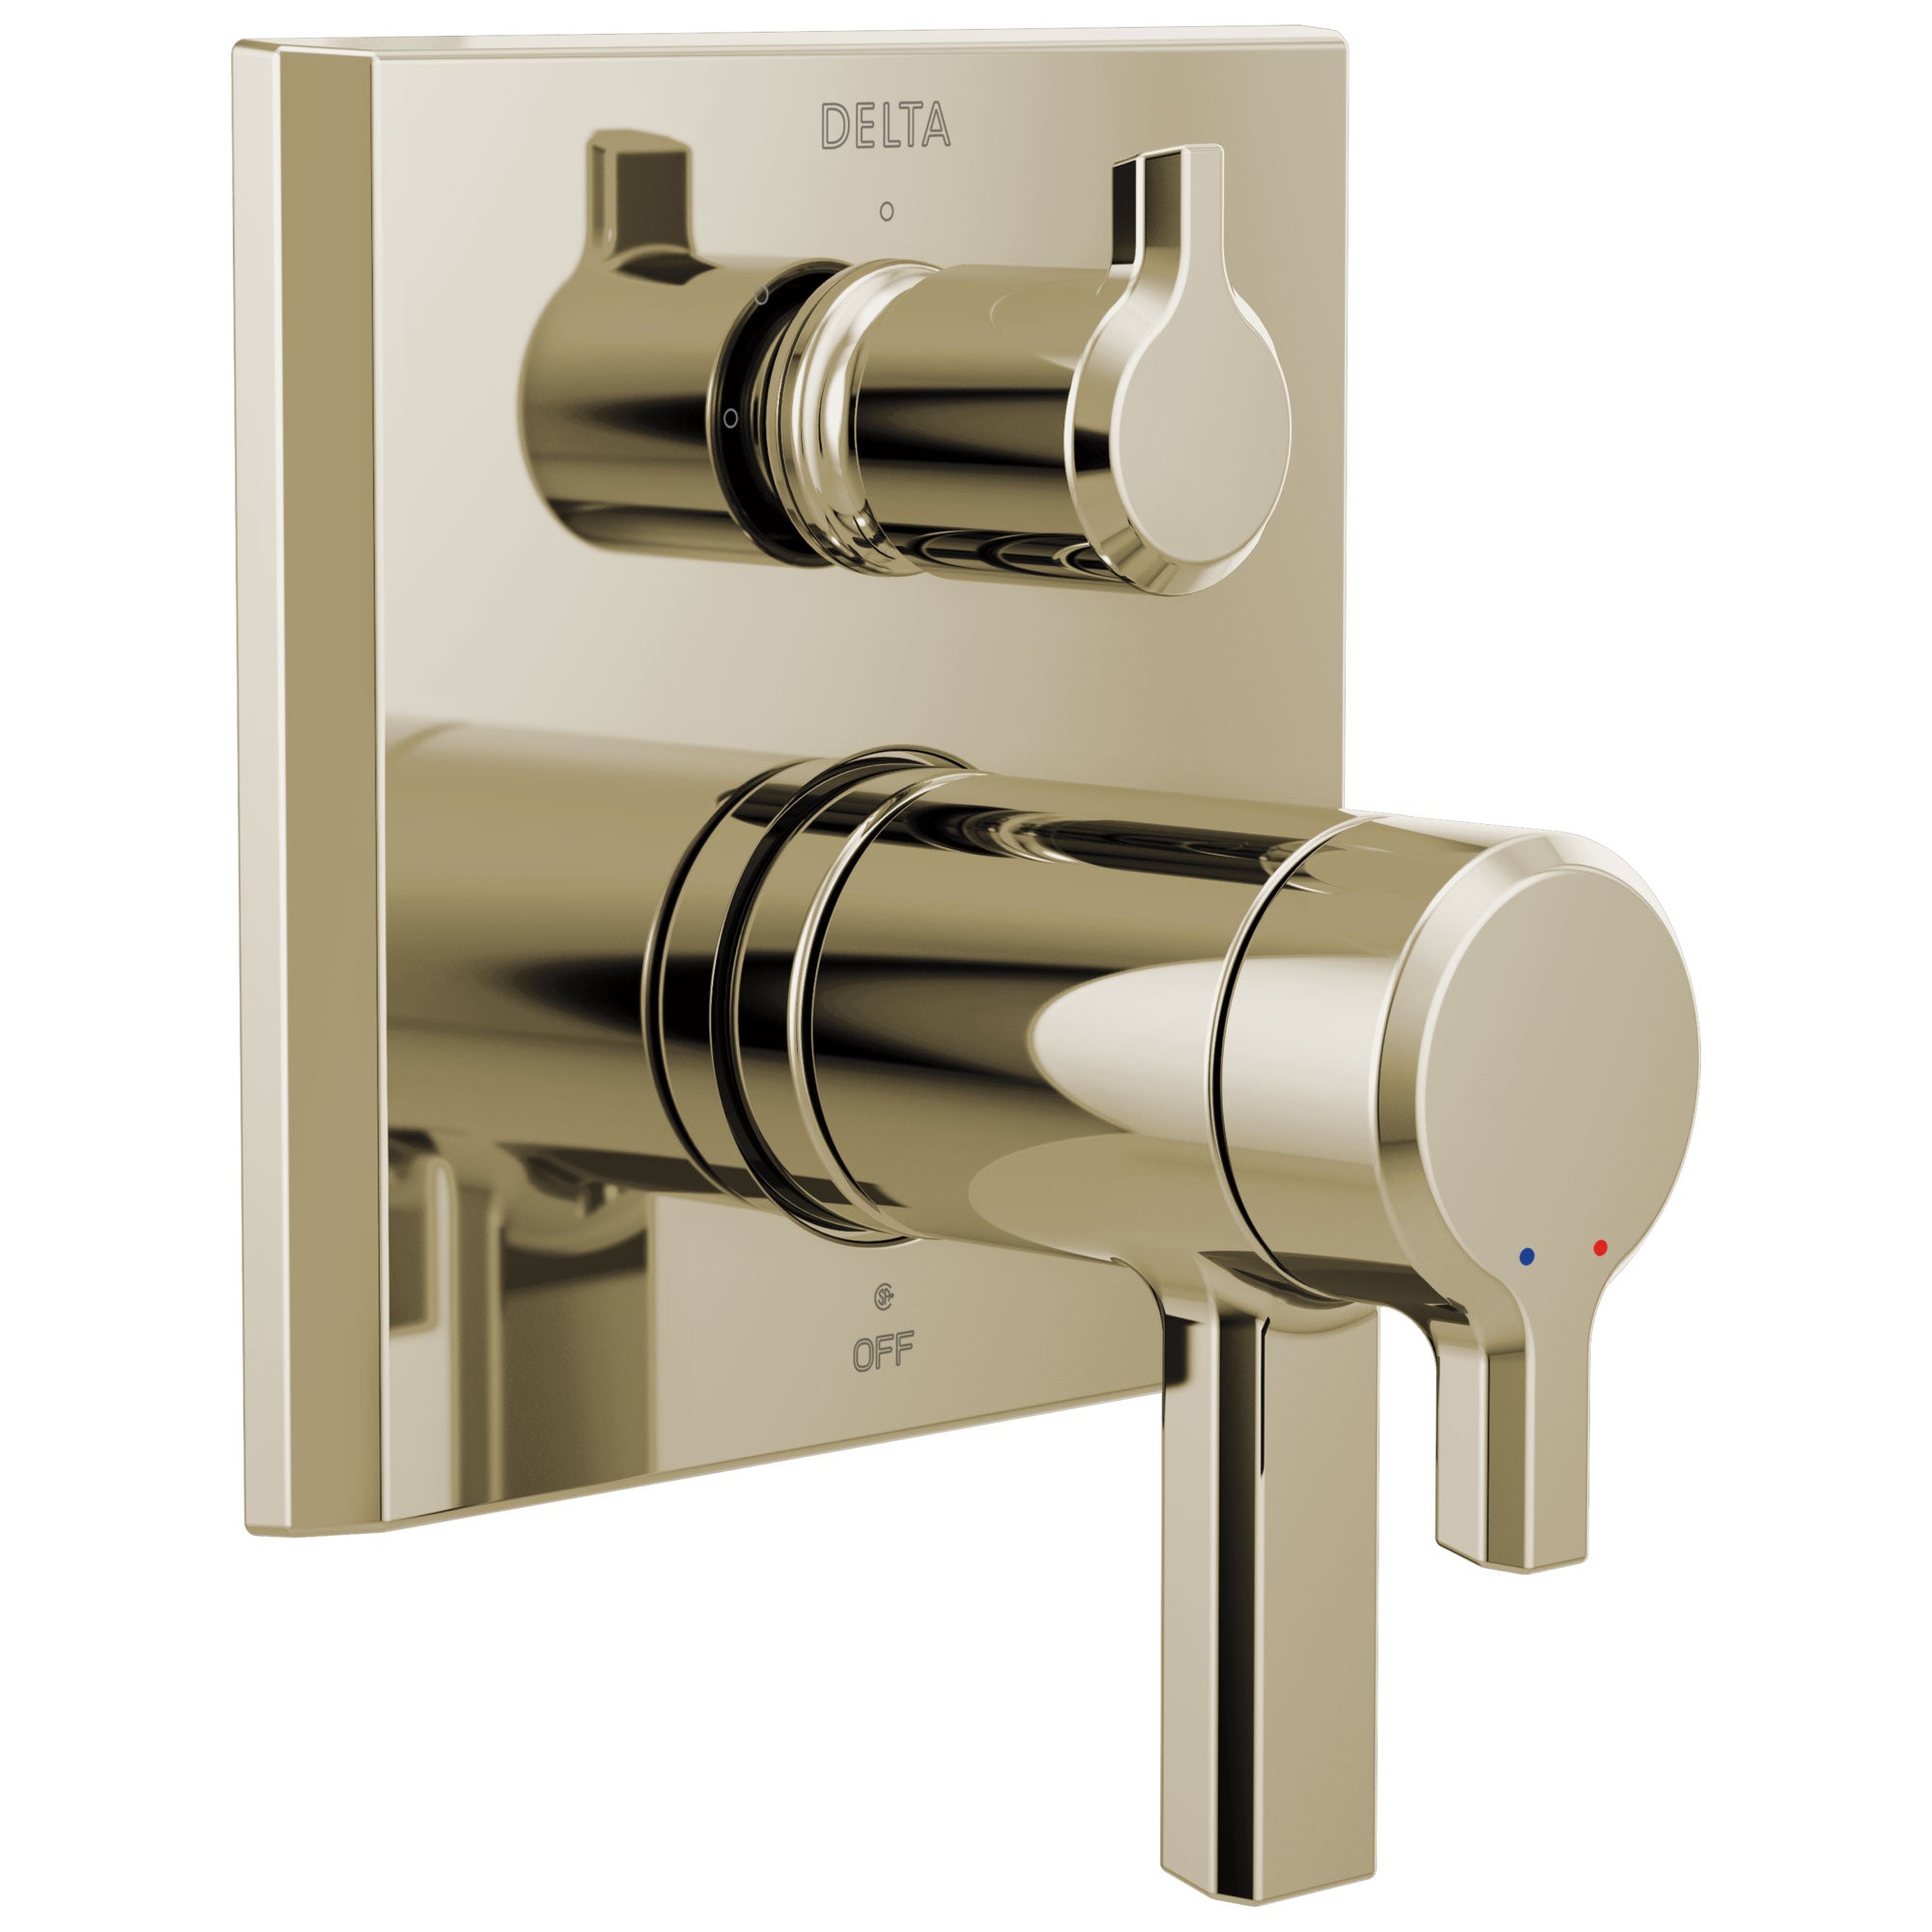 Delta Pivotal Polished Nickel Finish TempAssure 17T Series Shower Control Trim Kit with 3-Setting Integrated Diverter (Requires Valve) DT27T899PN